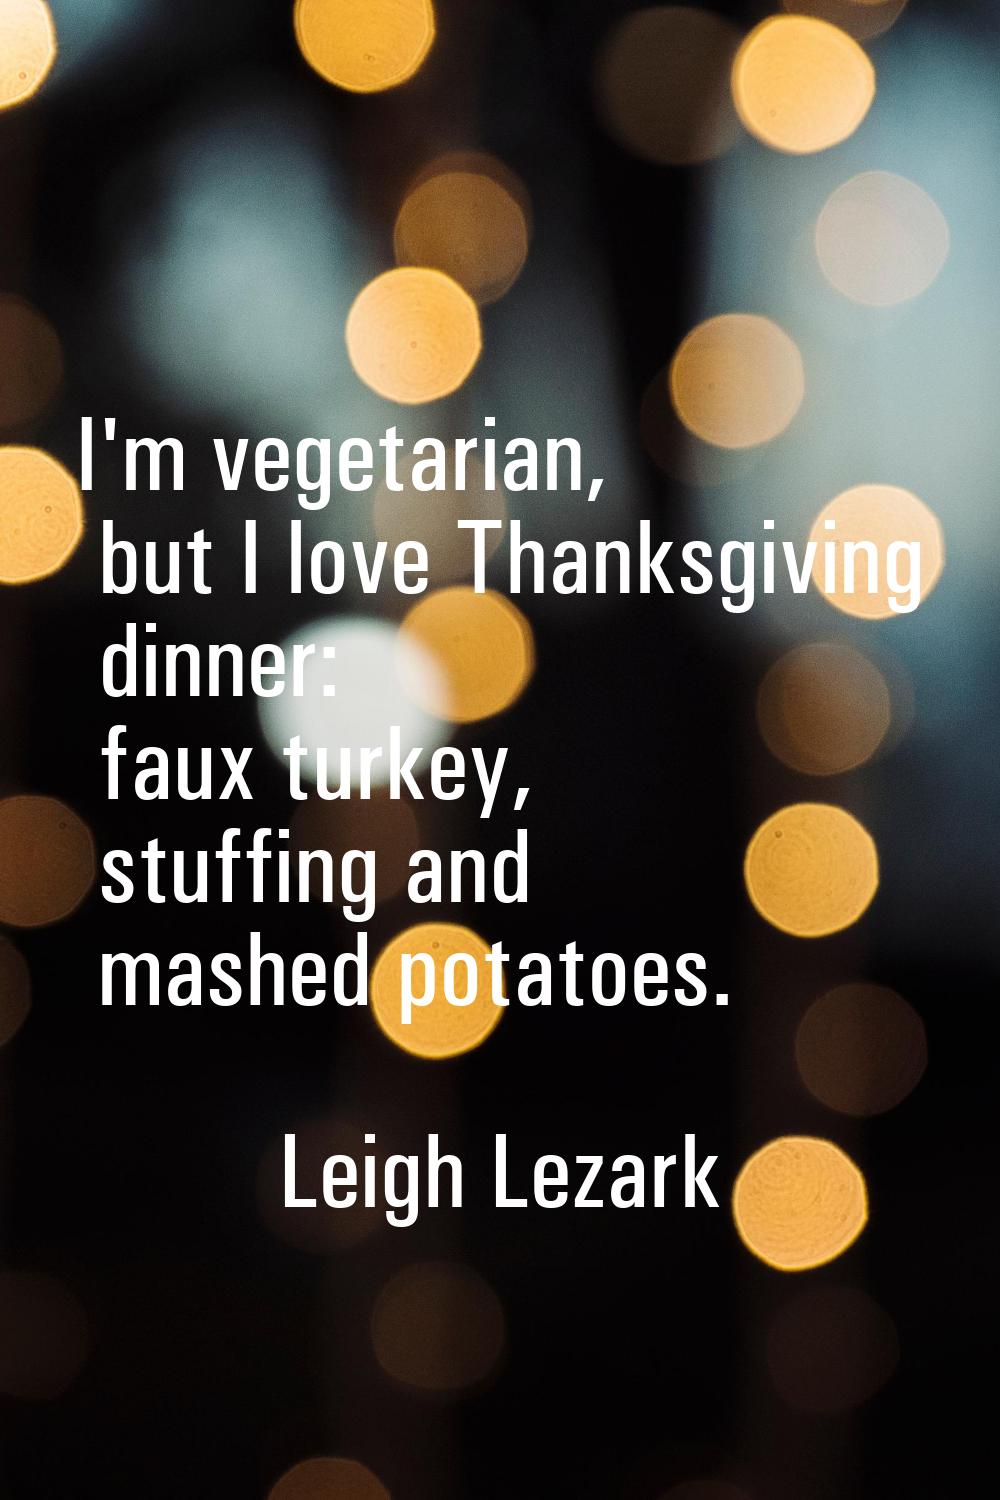 I'm vegetarian, but I love Thanksgiving dinner: faux turkey, stuffing and mashed potatoes.